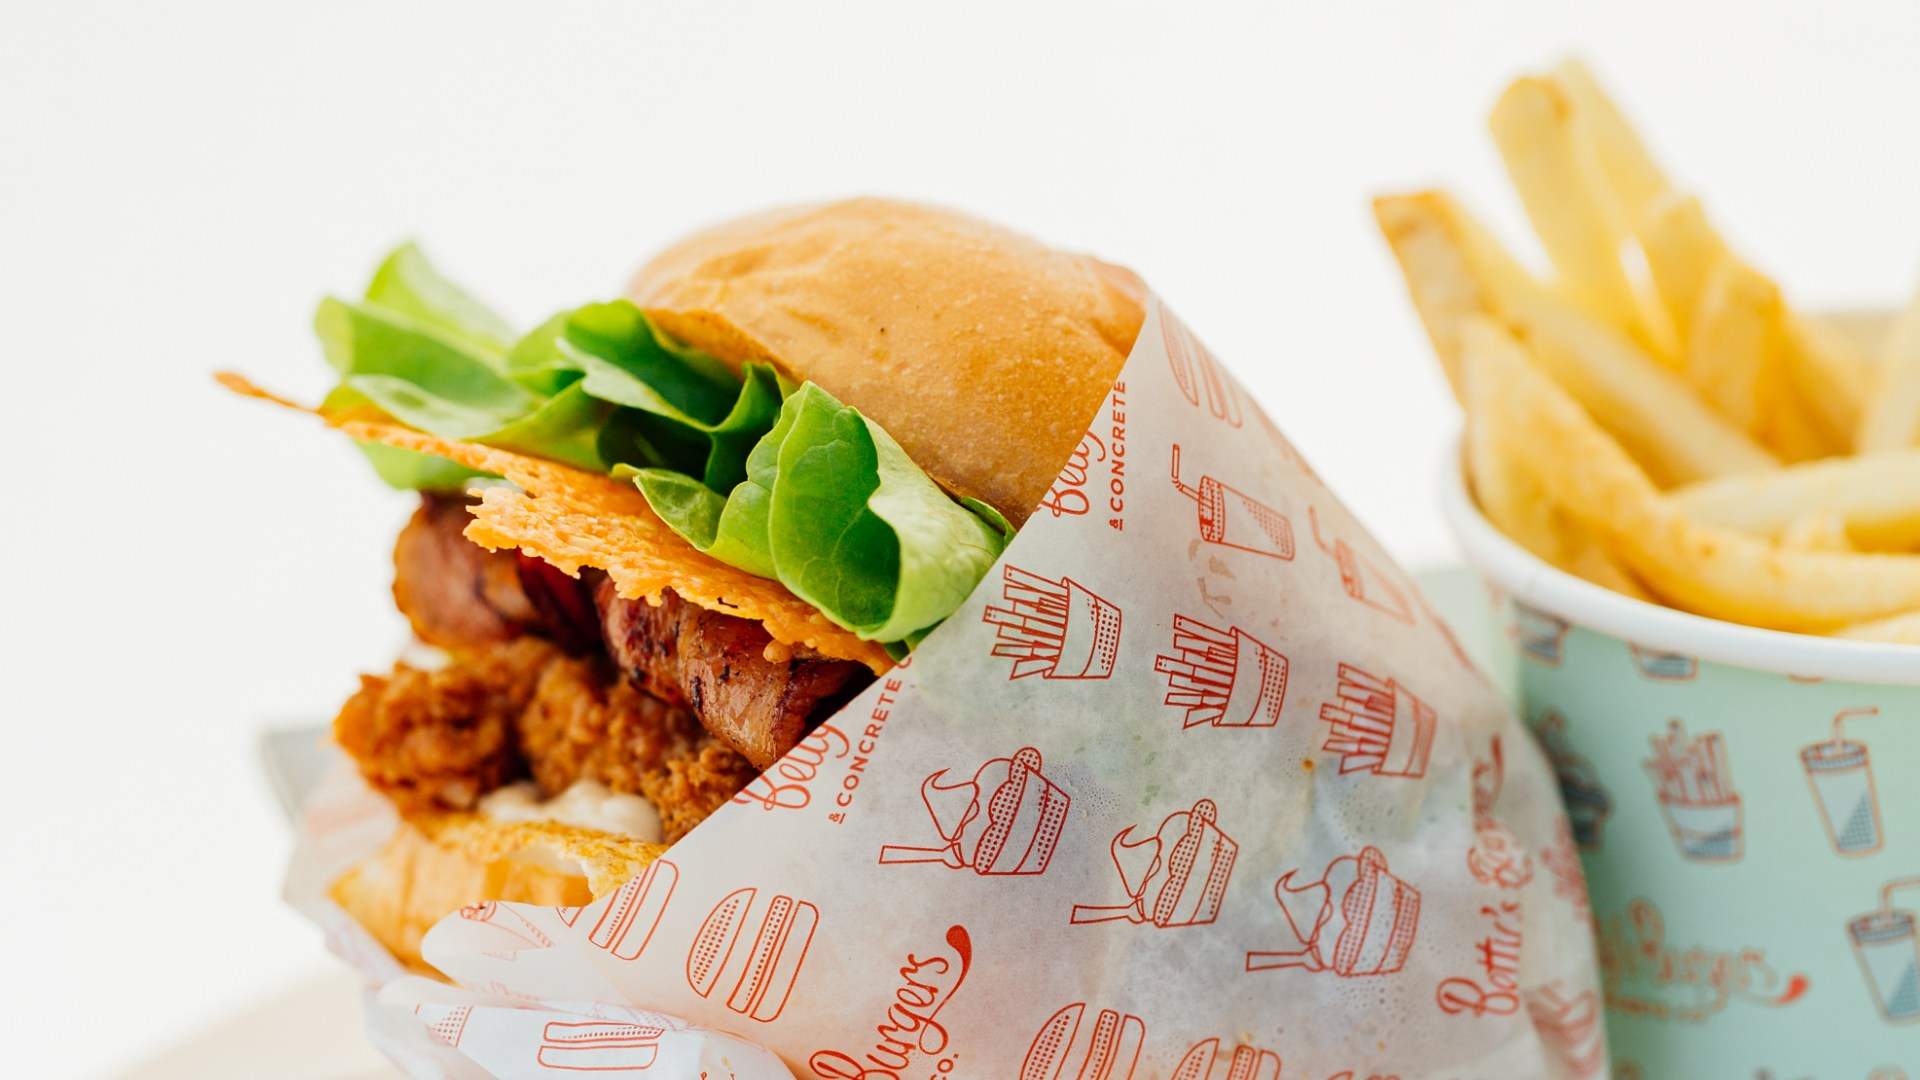 Betty's Burgers' Crispy Chicken Collection